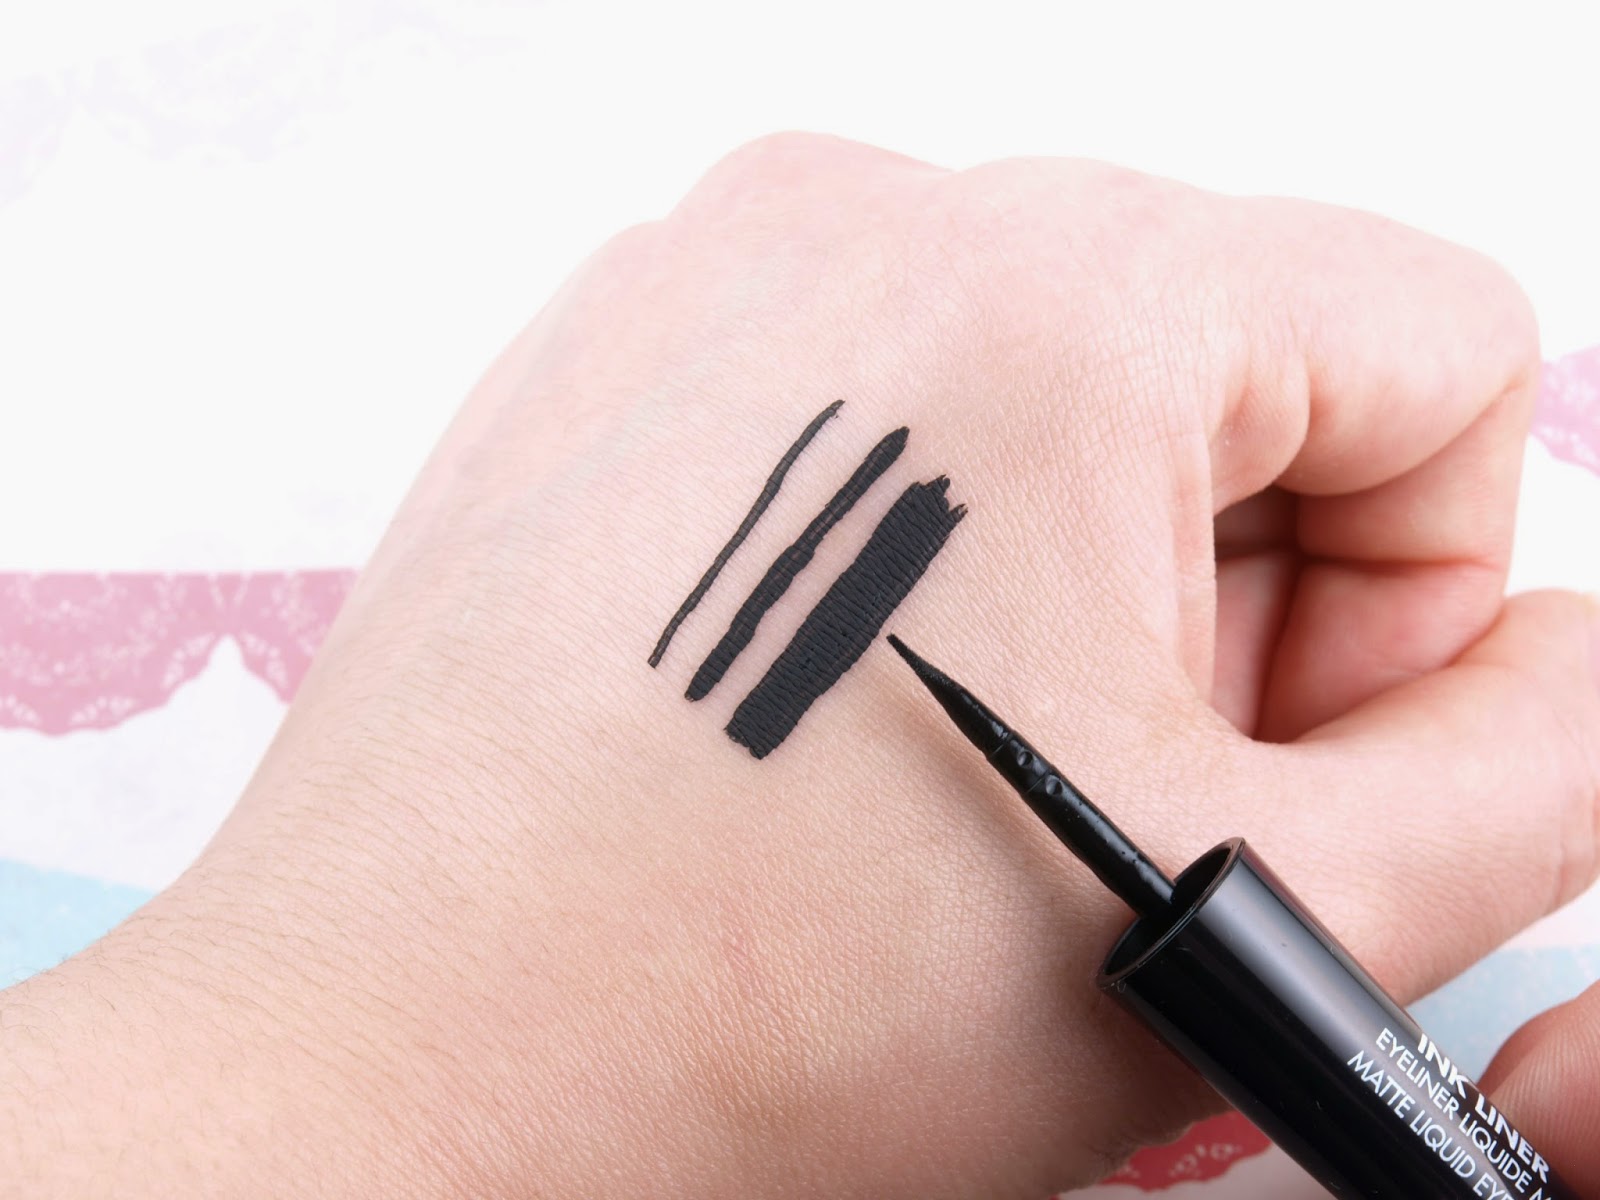 Make Up For Ever Ink Liner Matte Liquid Eyeliner: Review and Swatches